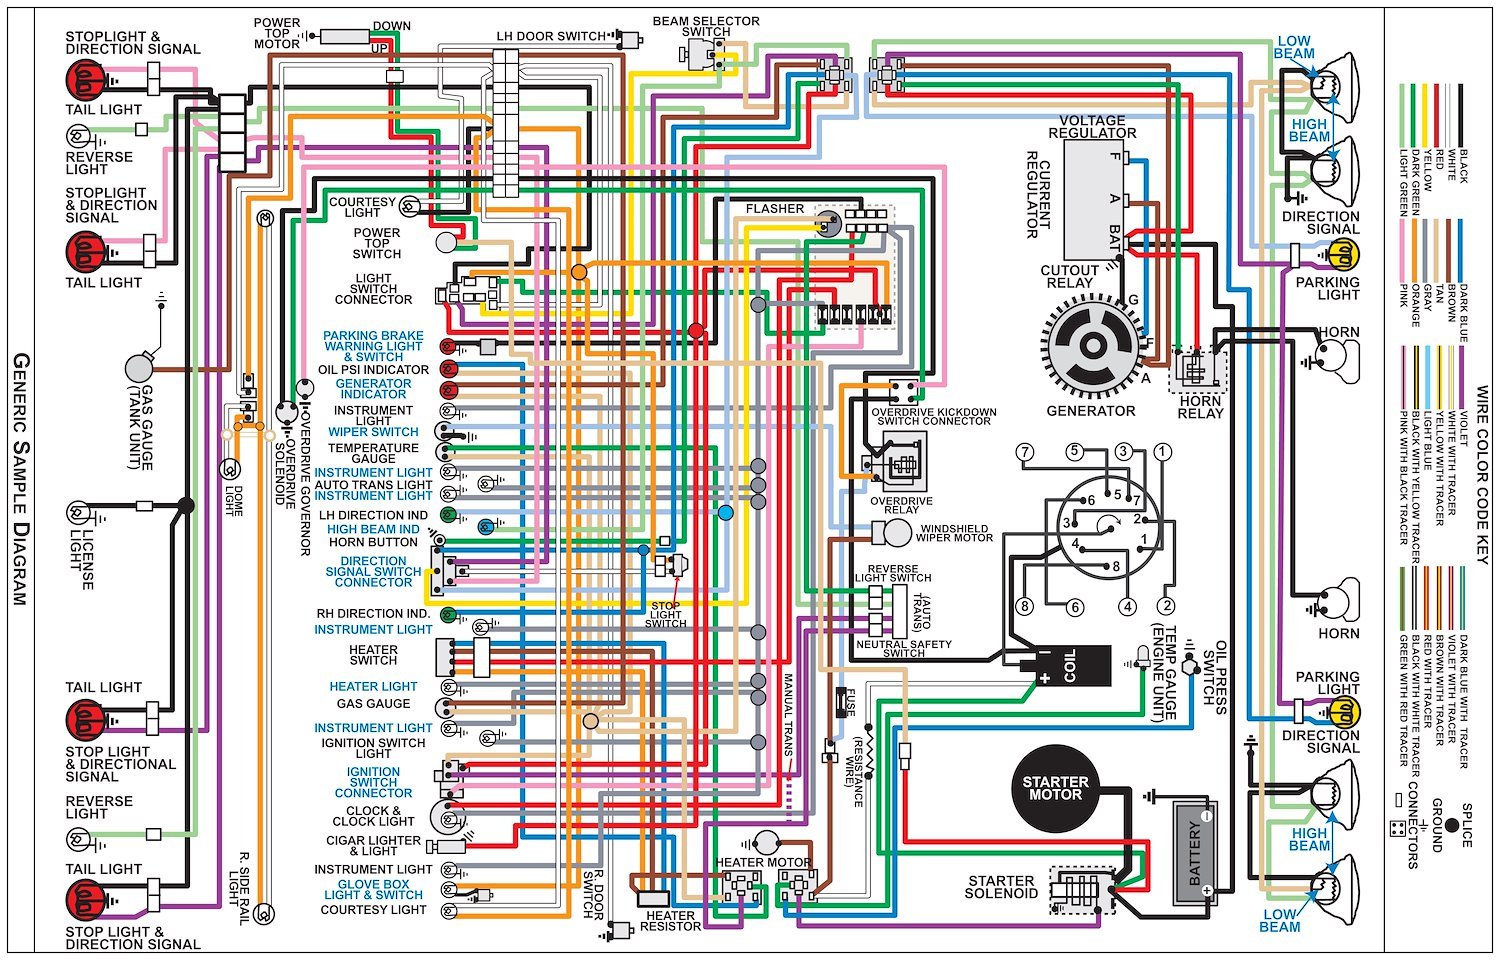 Wiring Diagram for 1940 Cadillac LaSalle V8 Series